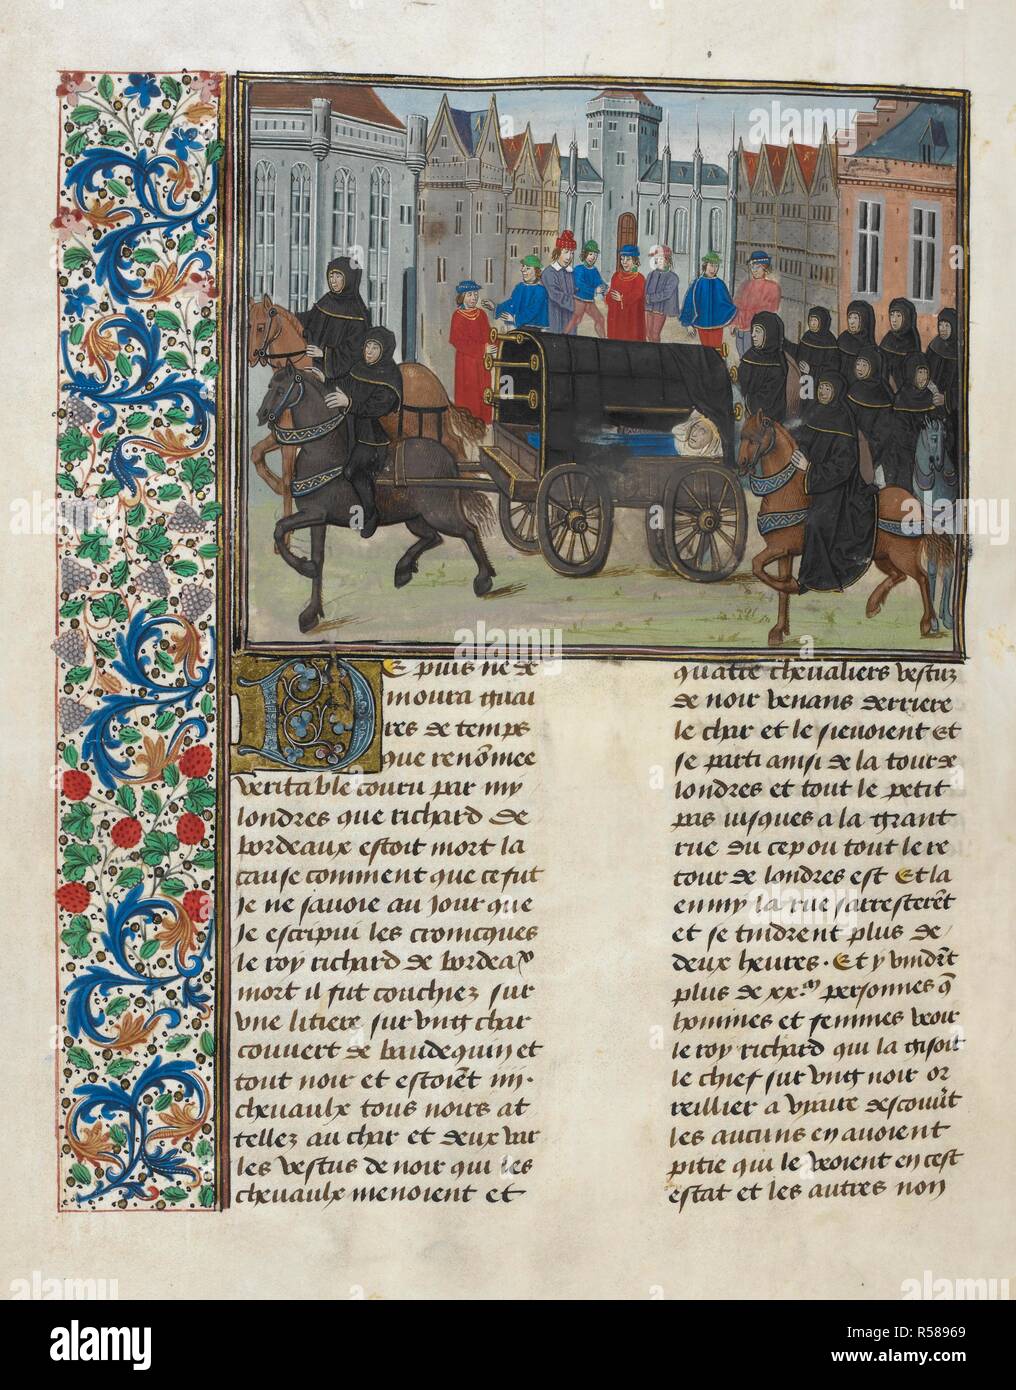 The funeral procession of King Richard II of England. Chroniques de France et d'Angleterre, Book IV. S. Netherlands; circa 1460-1480. Source: Royal 18 E. II, f.416v. Language: French. Author: FROISSART, JEAN. Stock Photo